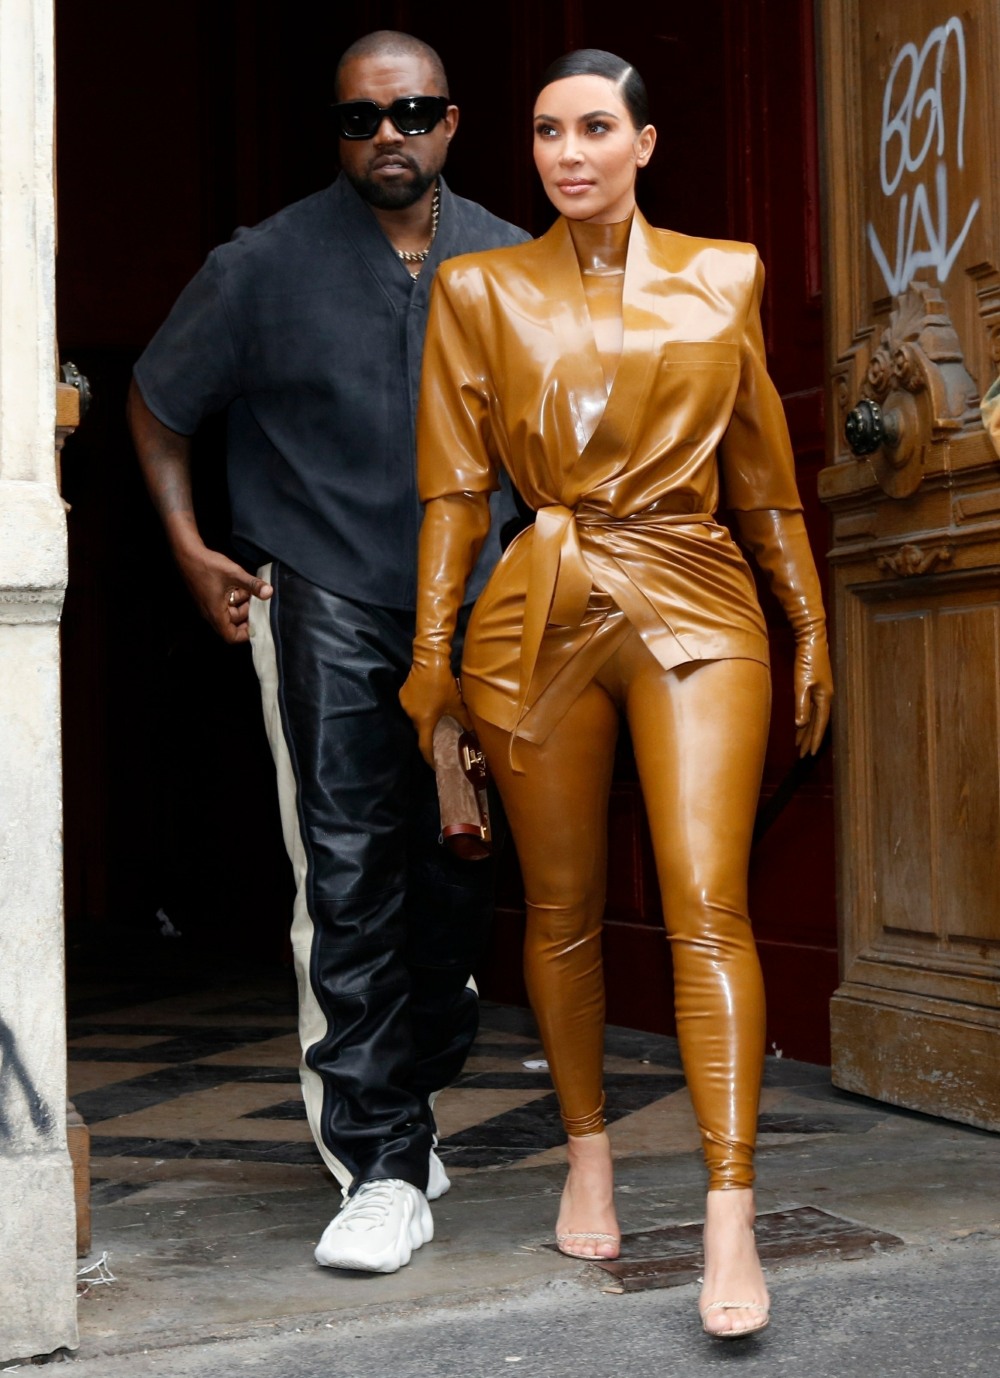 Kanye West, Kim Kardashian, their daughter North West, and family attend Kanye's 'Sunday Service' in Paris